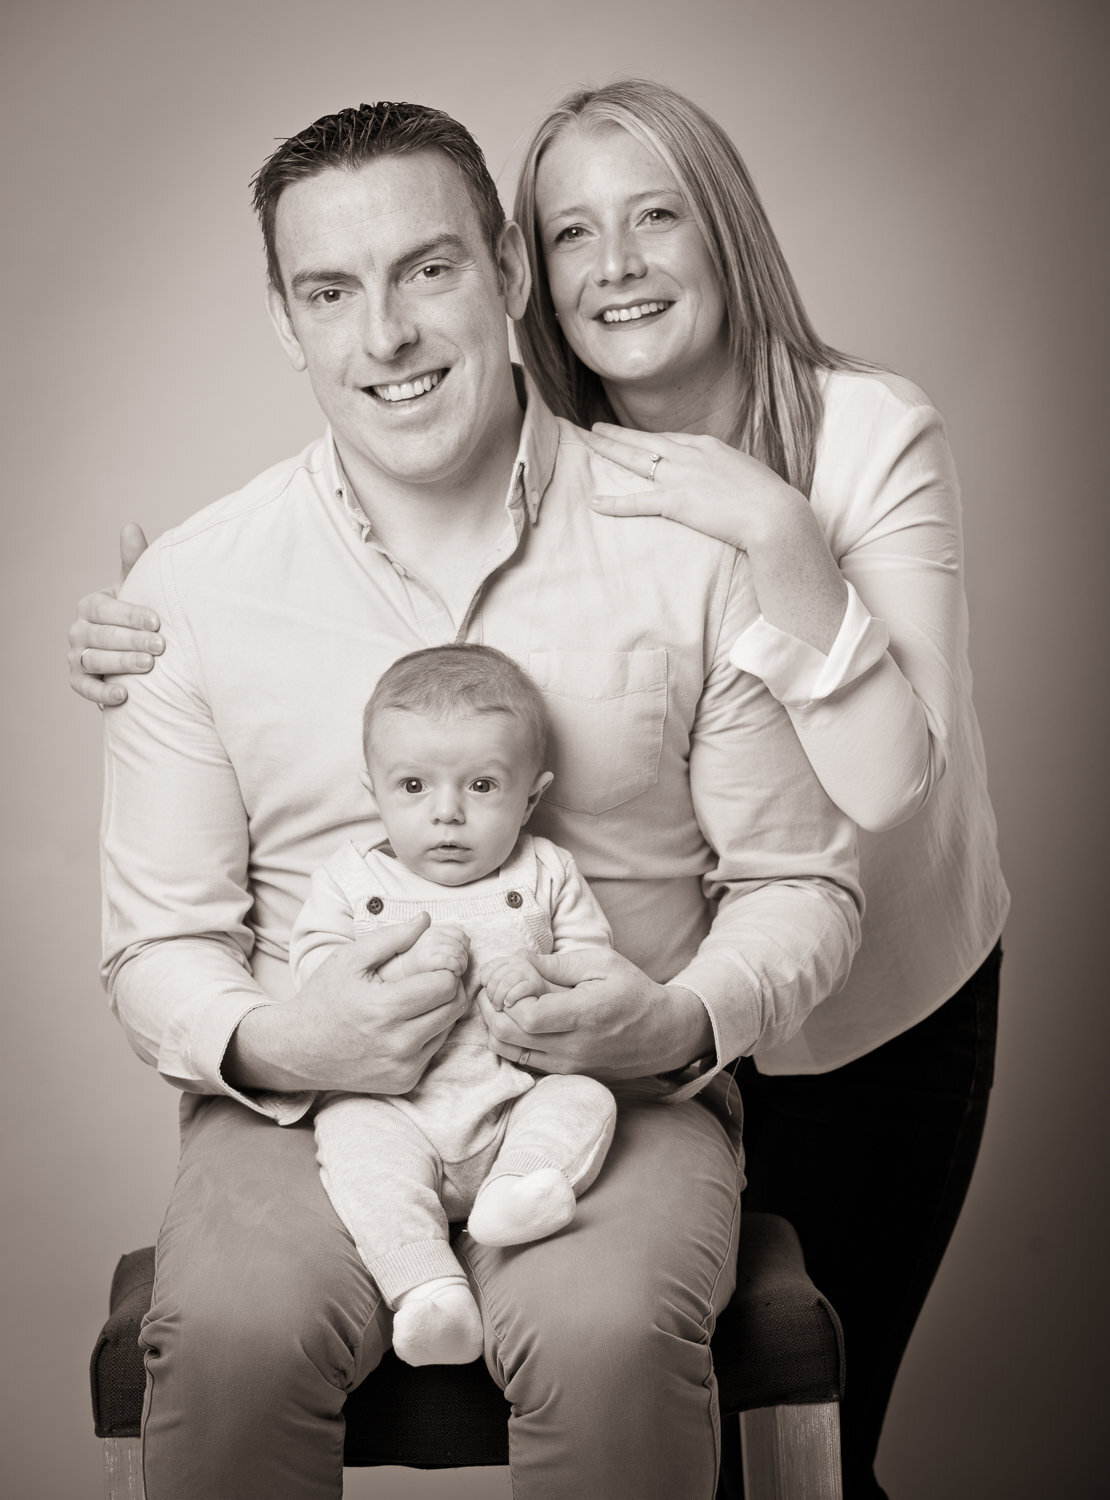 black & white portrait of a mother, father and baby smiling